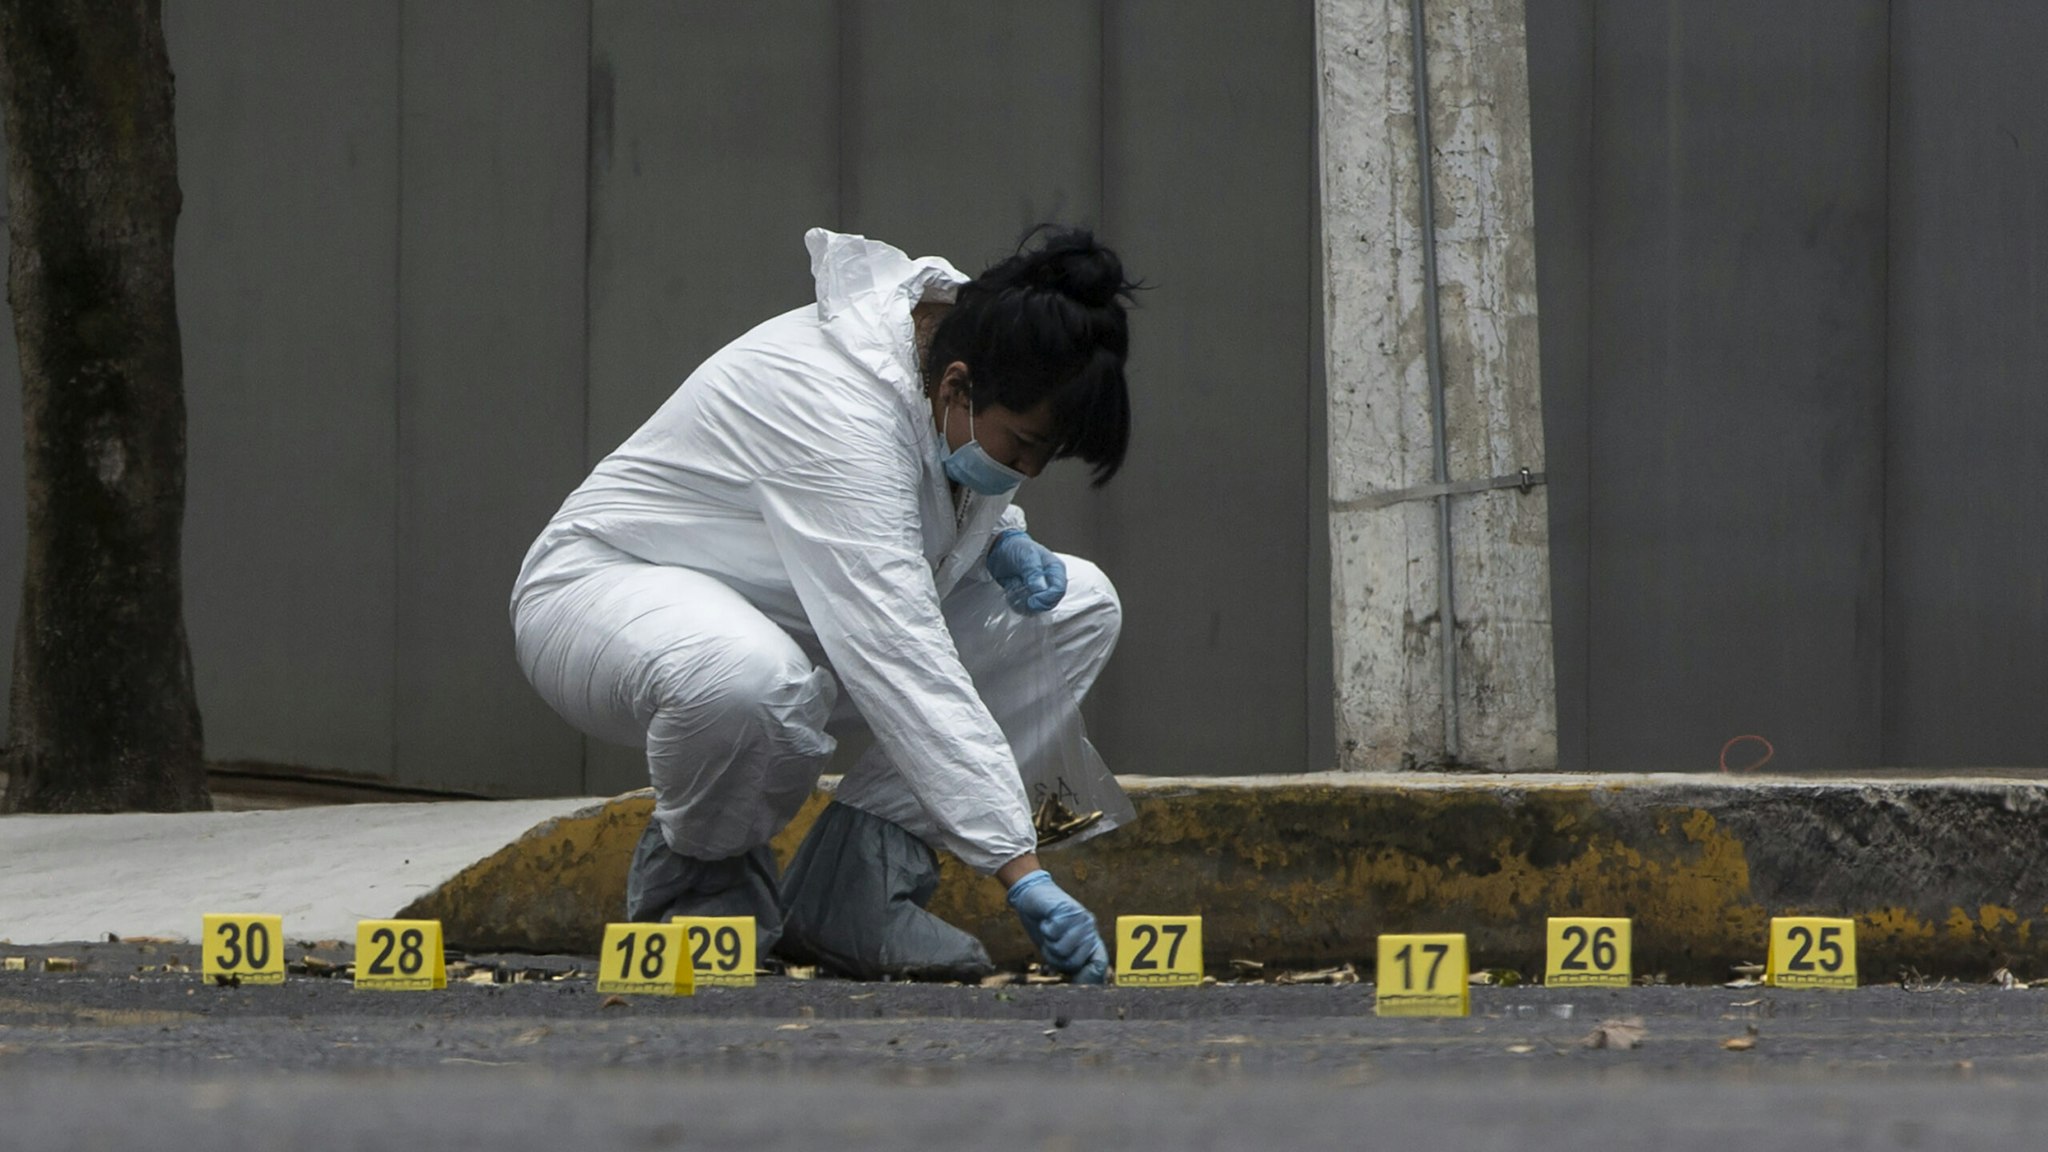 MEXICO CITY, MEXICO - JUNE 26: An expert of the Mexico City government collects bullets from the place where the attack against the Mexico City Police Chief Omar García Harfuch occurred on June 26, 2020 in Mexico City, Mexico. This morning Security Secretary of Mexico City suffered an attack that has been attributed to the Cartel Jalisco Nueva Generacion. Harfuch and his team received medical attention and are reported out of danger but 3 people died in the shootout (2 guards, 1 attacker and a civlian) and 12 were taken under police custody. (Photo by Cristopher Rogel Blanquet/Getty Images)